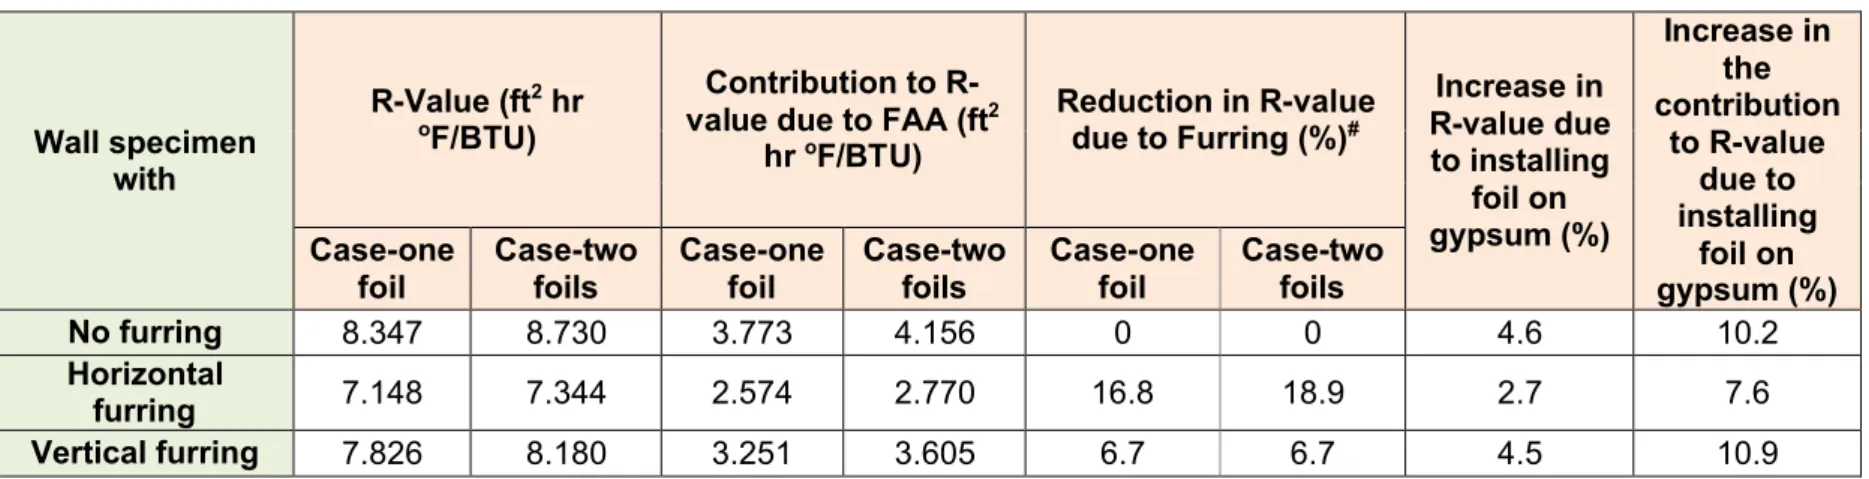 Table 1. Comparison between R-values of wall specimens with and without furring for the “Case-one foil” and “Case-two foils”